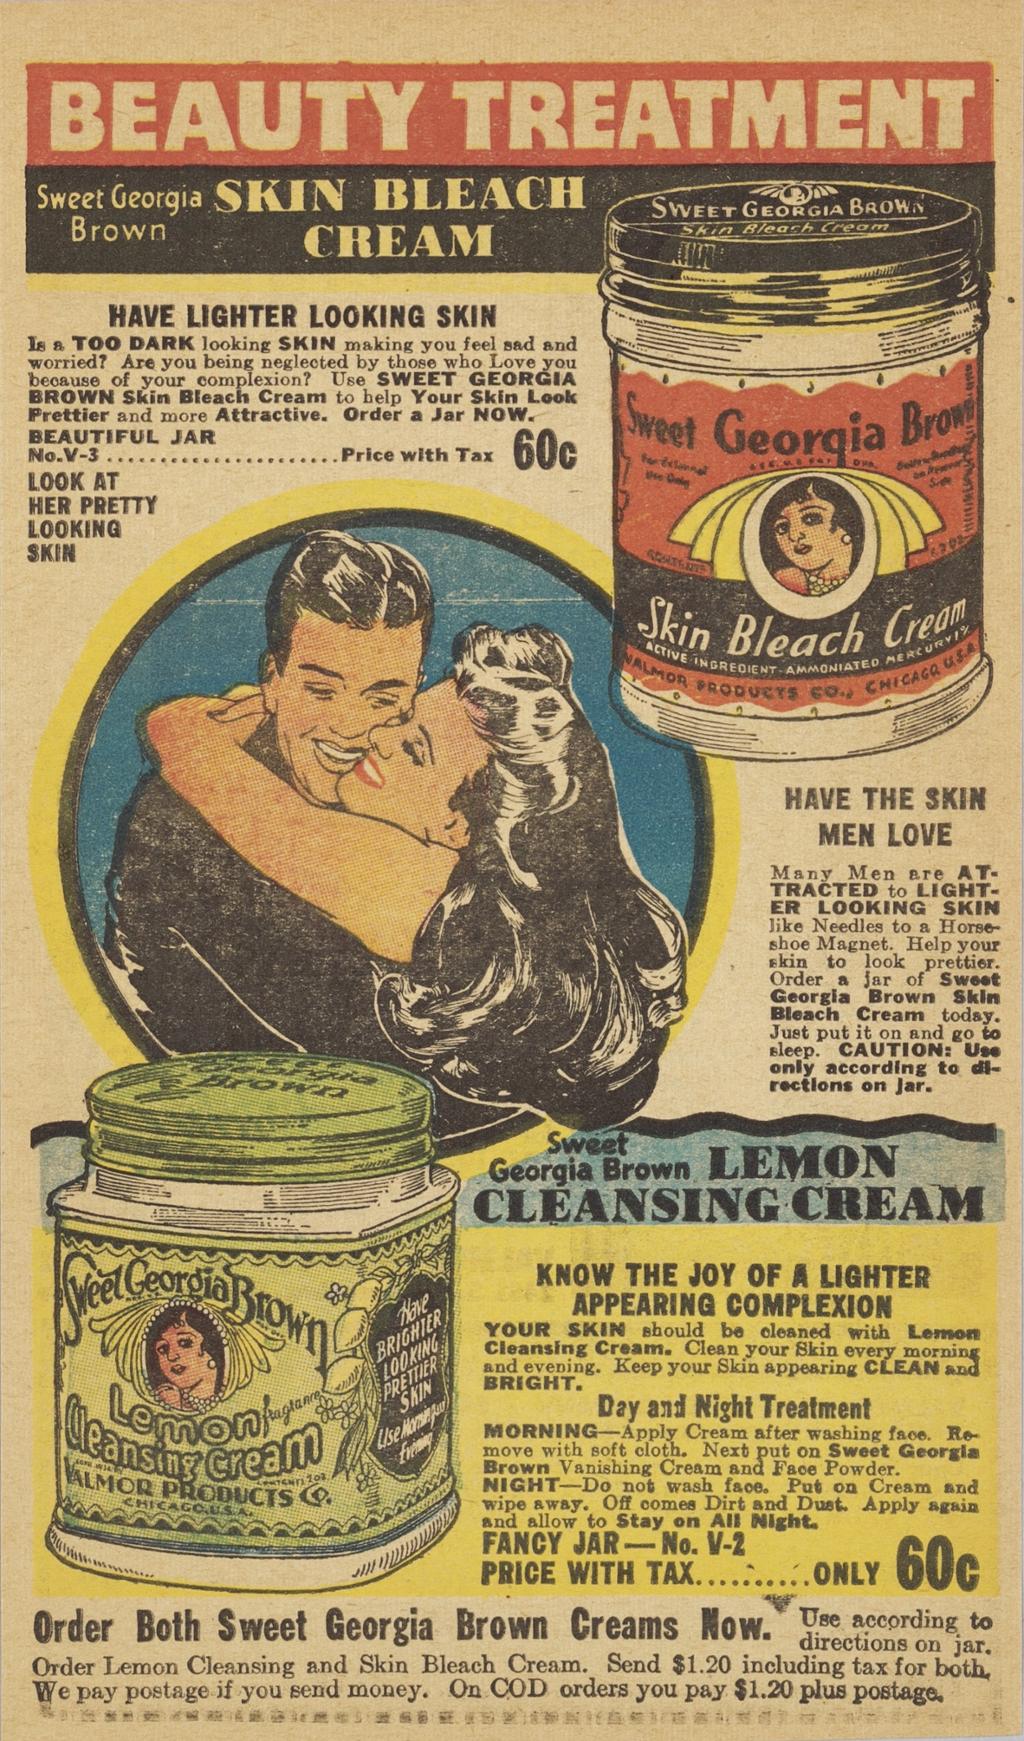 An advertisement from the 1930s for Sweet Georgia Brown skin bleaching cream and lemon cleansing cream.